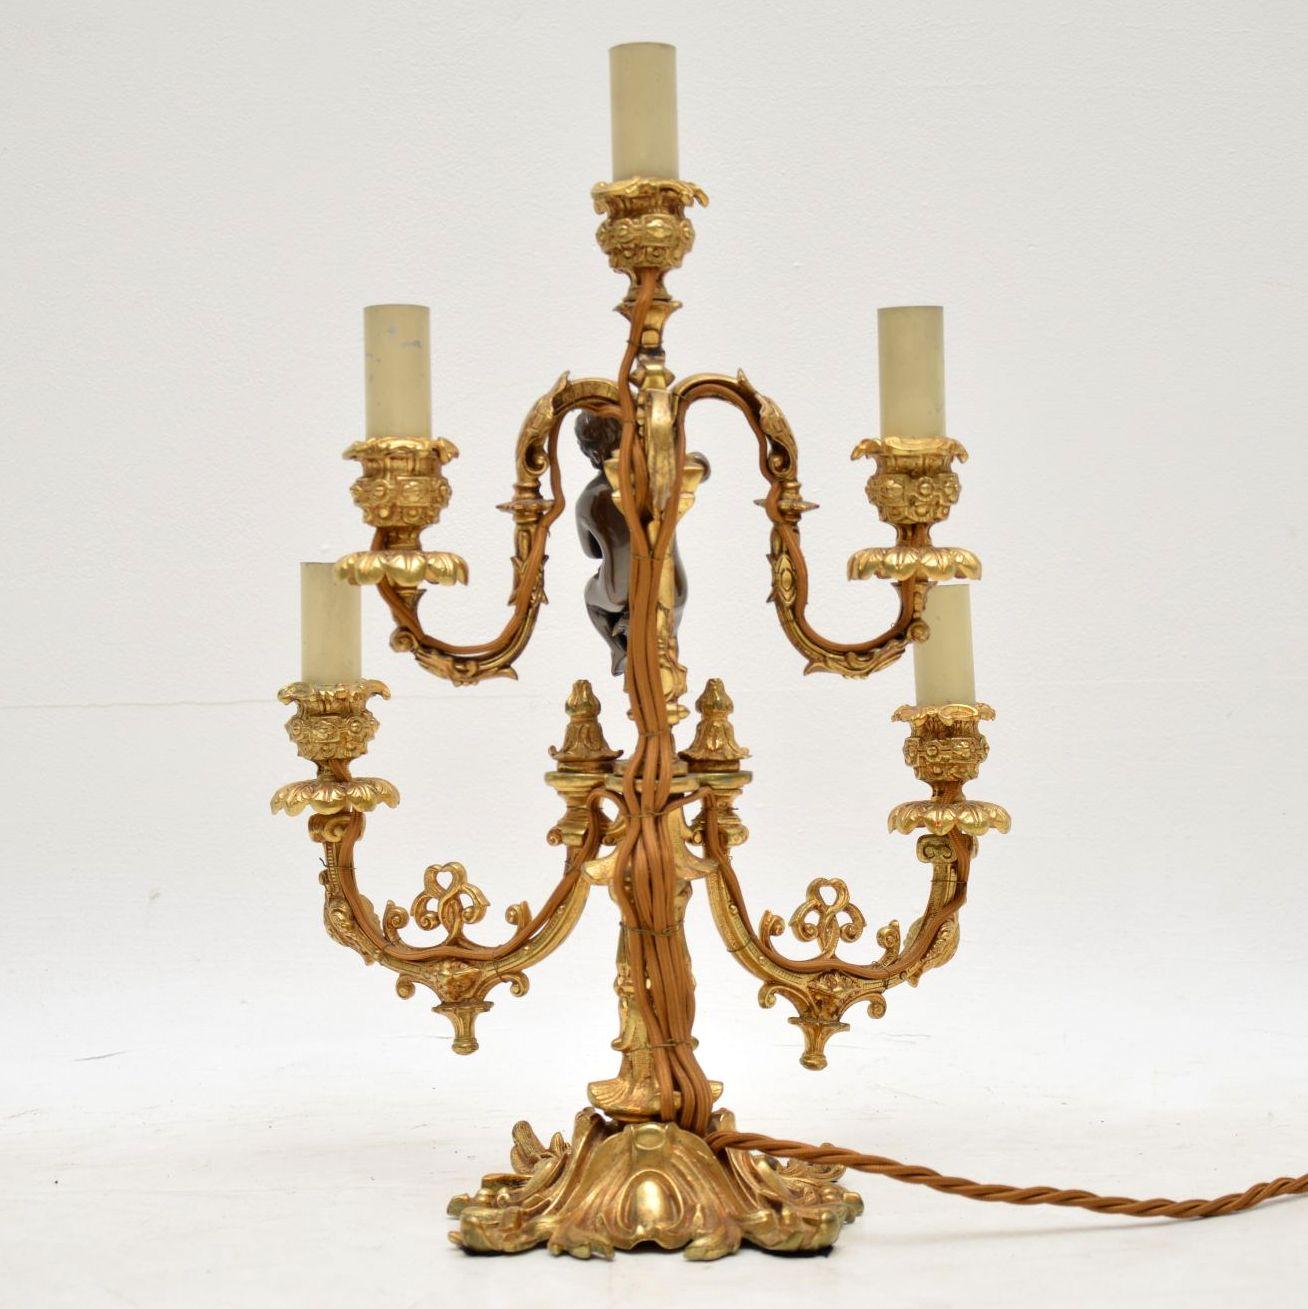 Louis XV Antique French Gilt Metal Candelabra Table Lamp